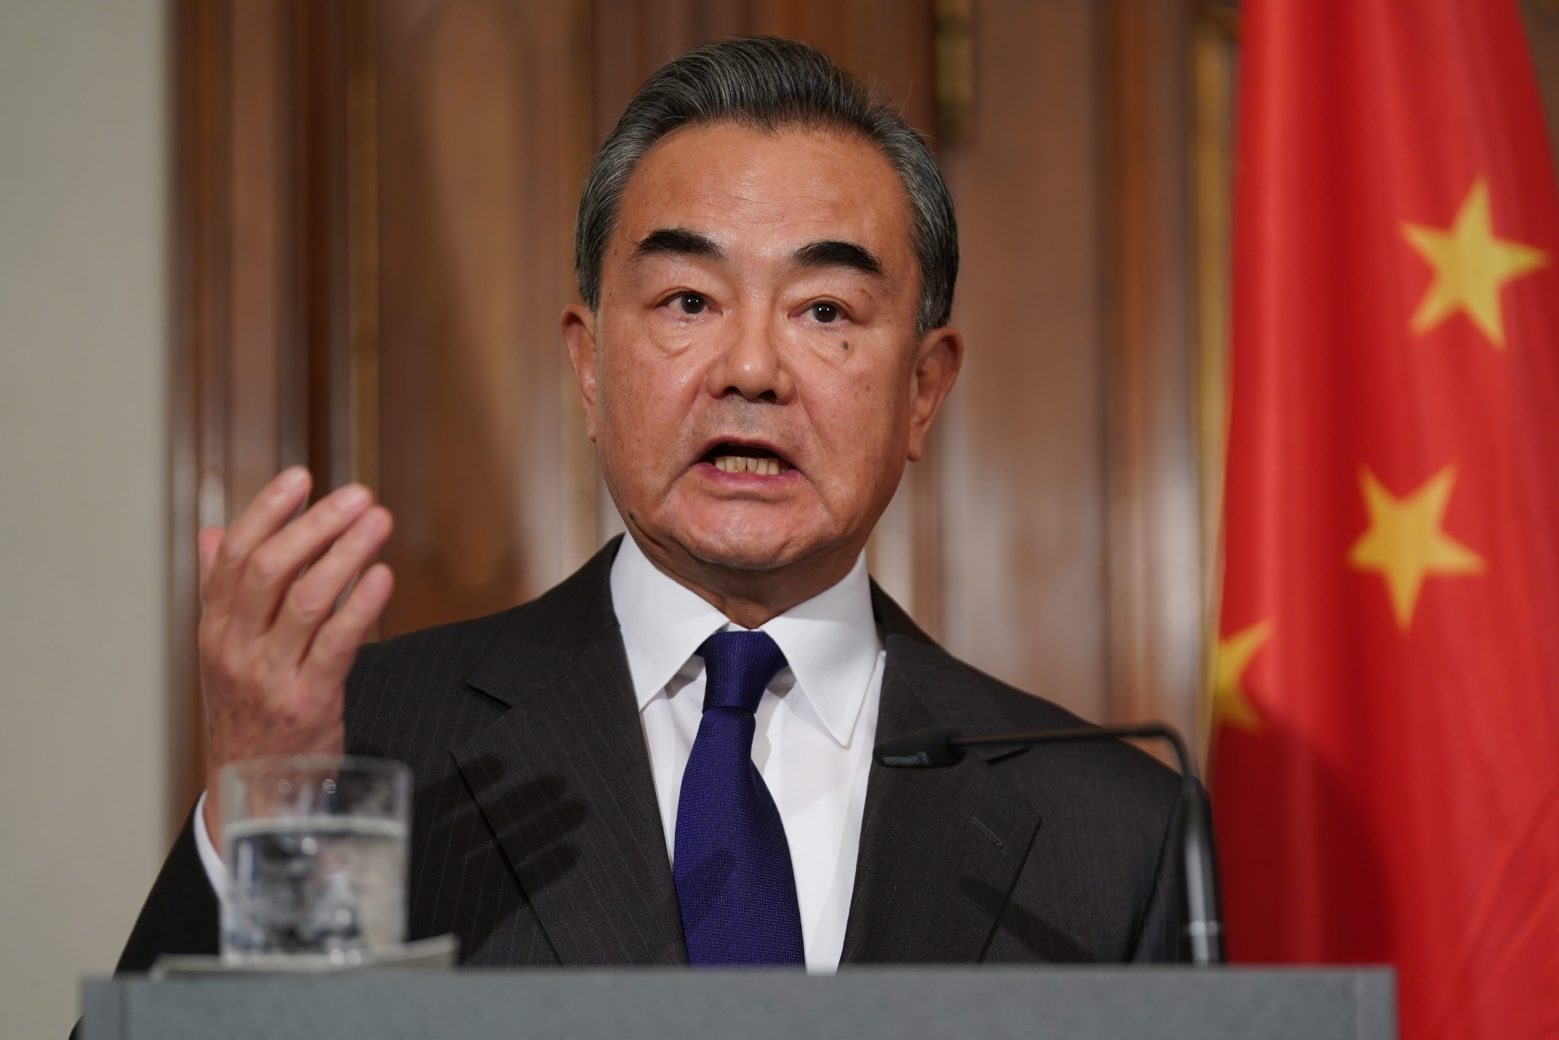 epa08216011 Foreign Minister of the People's Republic of China Wang Yi attends a joint press statement at the Villa Borsig in Berlin, Germany, 13 February 2020. Chinese Foreign Minister visits the German capital prior to attending Munich Security Conference.  EPA/HAYOUNG JEON GERMANY CHINA DIPLOMACY